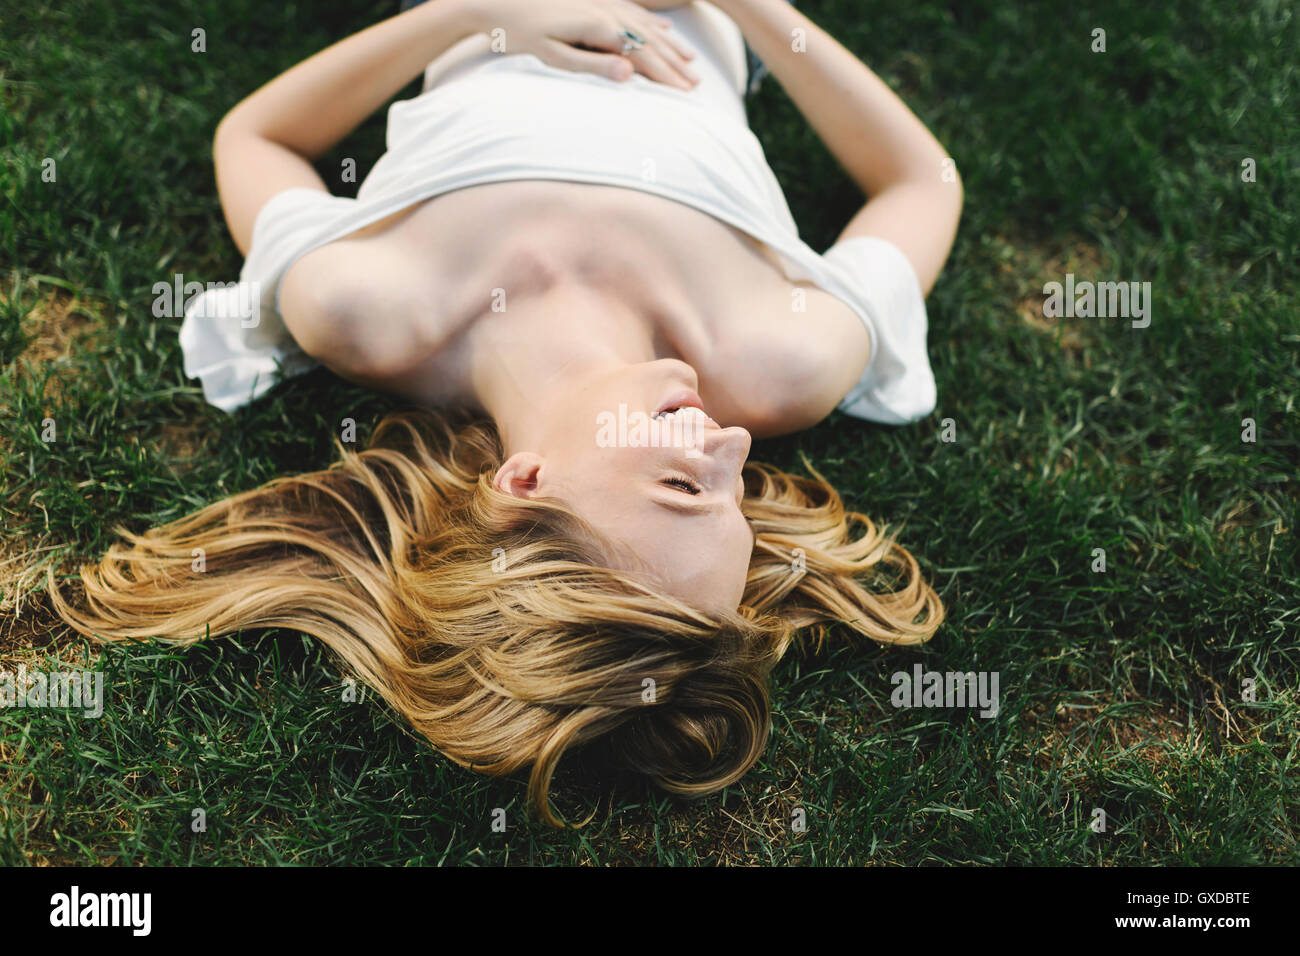 Young woman lying on grass, rire Banque D'Images